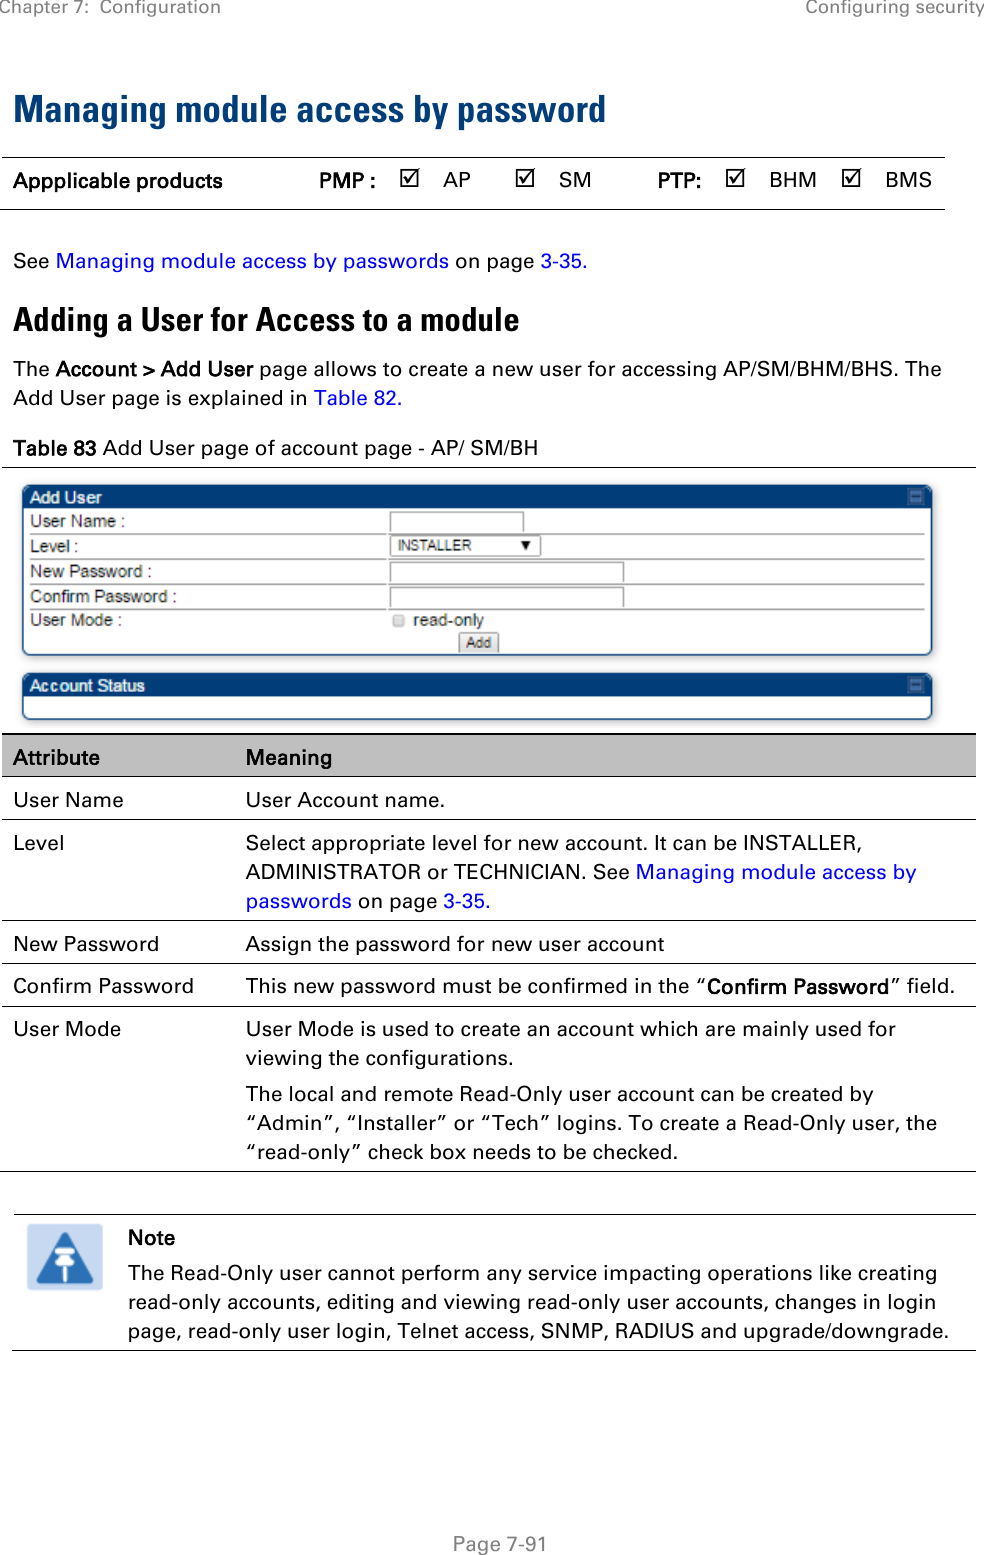 Chapter 7:  Configuration Configuring security   Page 7-91 Managing module access by password Appplicable products PMP :  AP  SM PTP:  BHM  BMS  See Managing module access by passwords on page 3-35. Adding a User for Access to a module The Account &gt; Add User page allows to create a new user for accessing AP/SM/BHM/BHS. The Add User page is explained in Table 82. Table 83 Add User page of account page - AP/ SM/BH  Attribute Meaning User Name User Account name. Level Select appropriate level for new account. It can be INSTALLER, ADMINISTRATOR or TECHNICIAN. See Managing module access by passwords on page 3-35. New Password Assign the password for new user account Confirm Password This new password must be confirmed in the “Confirm Password” field. User Mode User Mode is used to create an account which are mainly used for viewing the configurations.  The local and remote Read-Only user account can be created by “Admin”, “Installer” or “Tech” logins. To create a Read-Only user, the “read-only” check box needs to be checked.   Note The Read-Only user cannot perform any service impacting operations like creating read-only accounts, editing and viewing read-only user accounts, changes in login page, read-only user login, Telnet access, SNMP, RADIUS and upgrade/downgrade.  